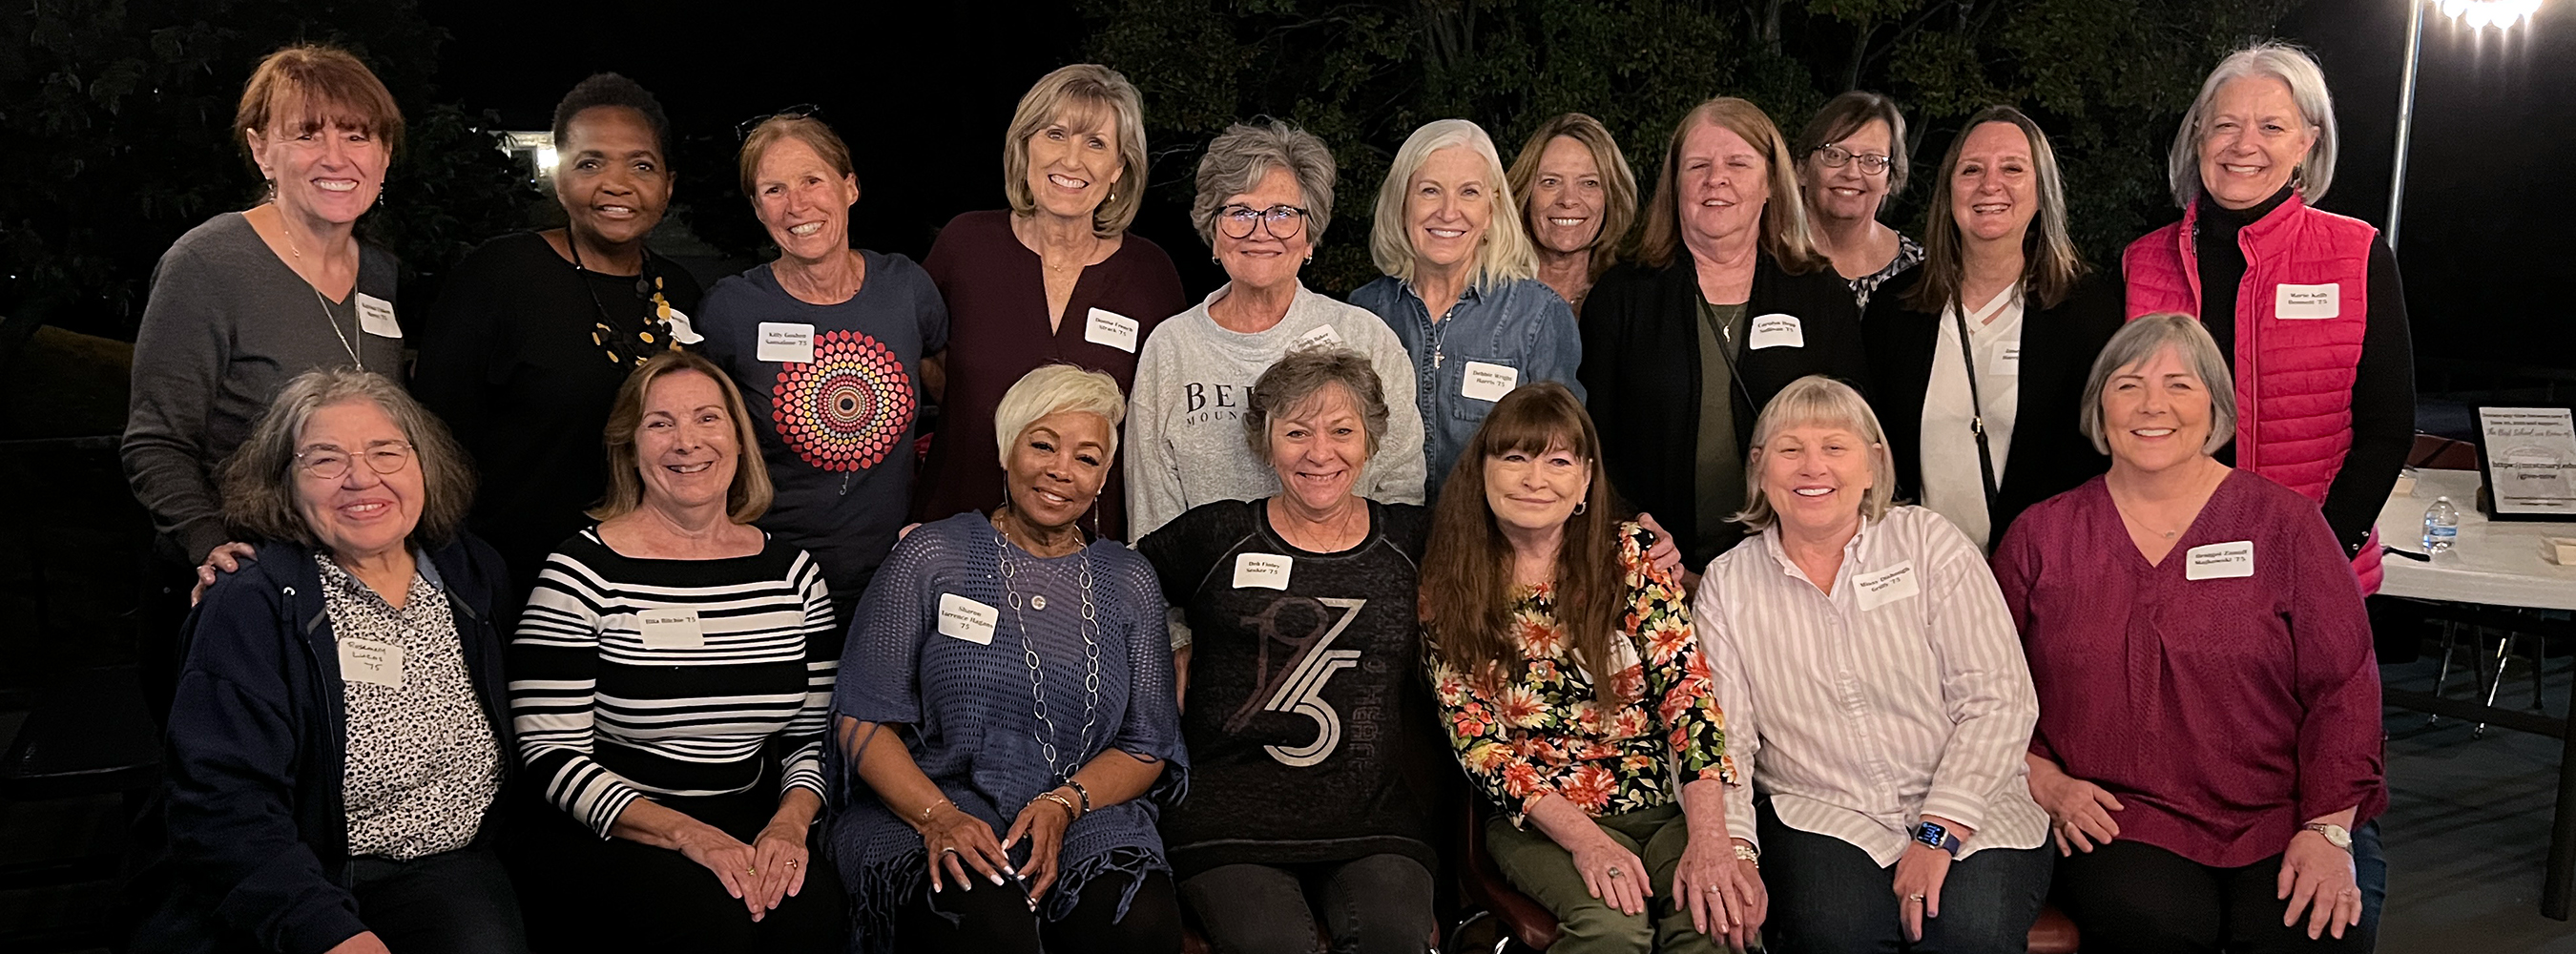 members of the MSM Class of 1975 during class reunion